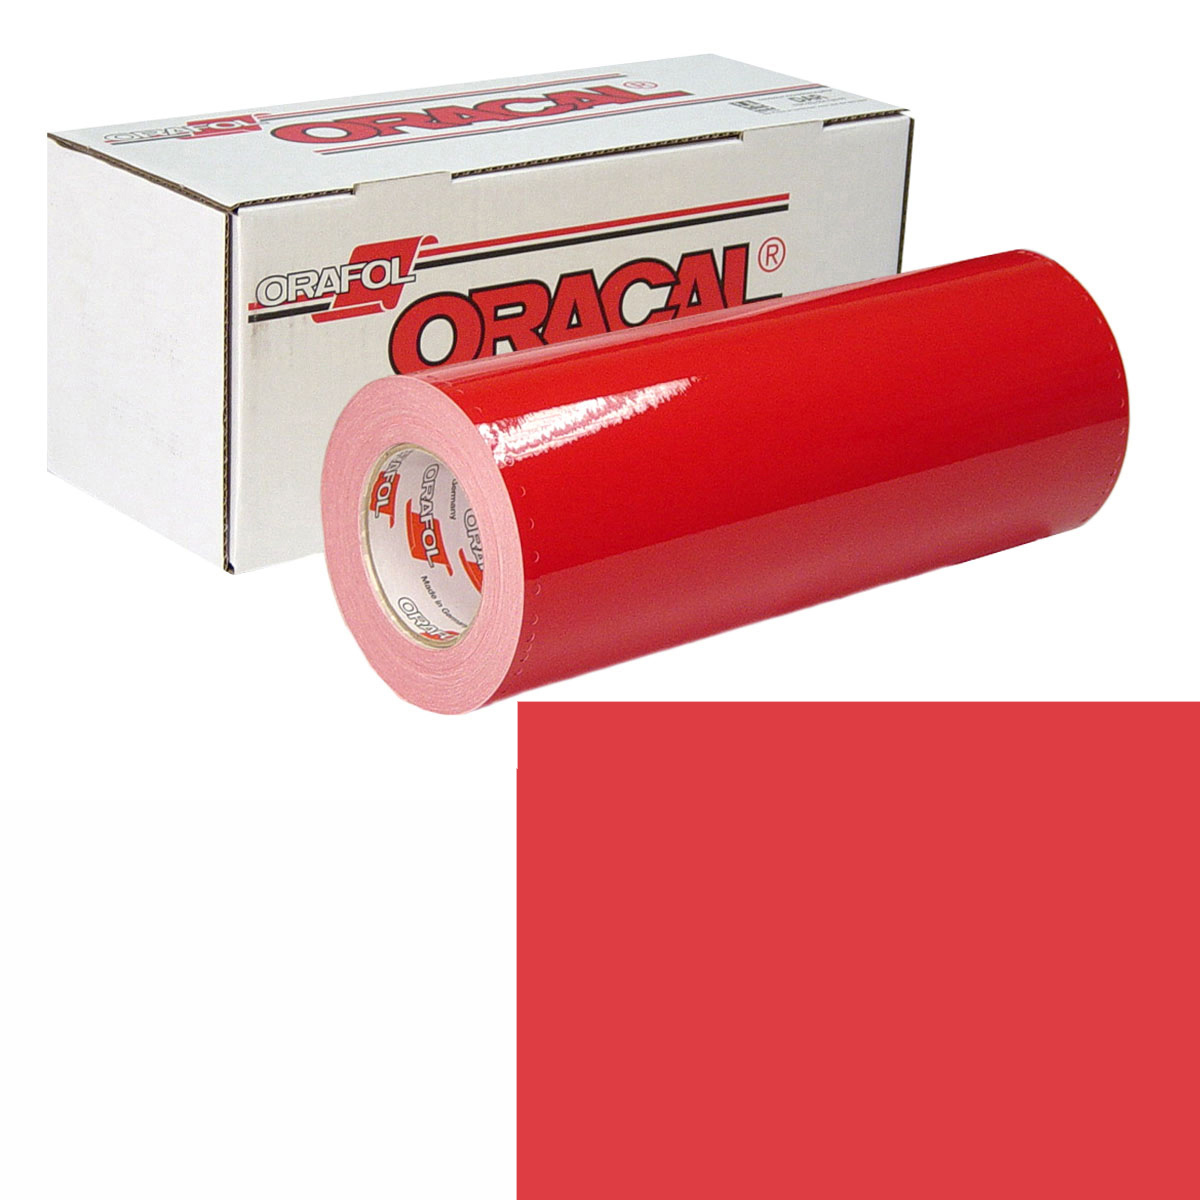 ORACAL 951 15in X 10yd 347 Red Coral